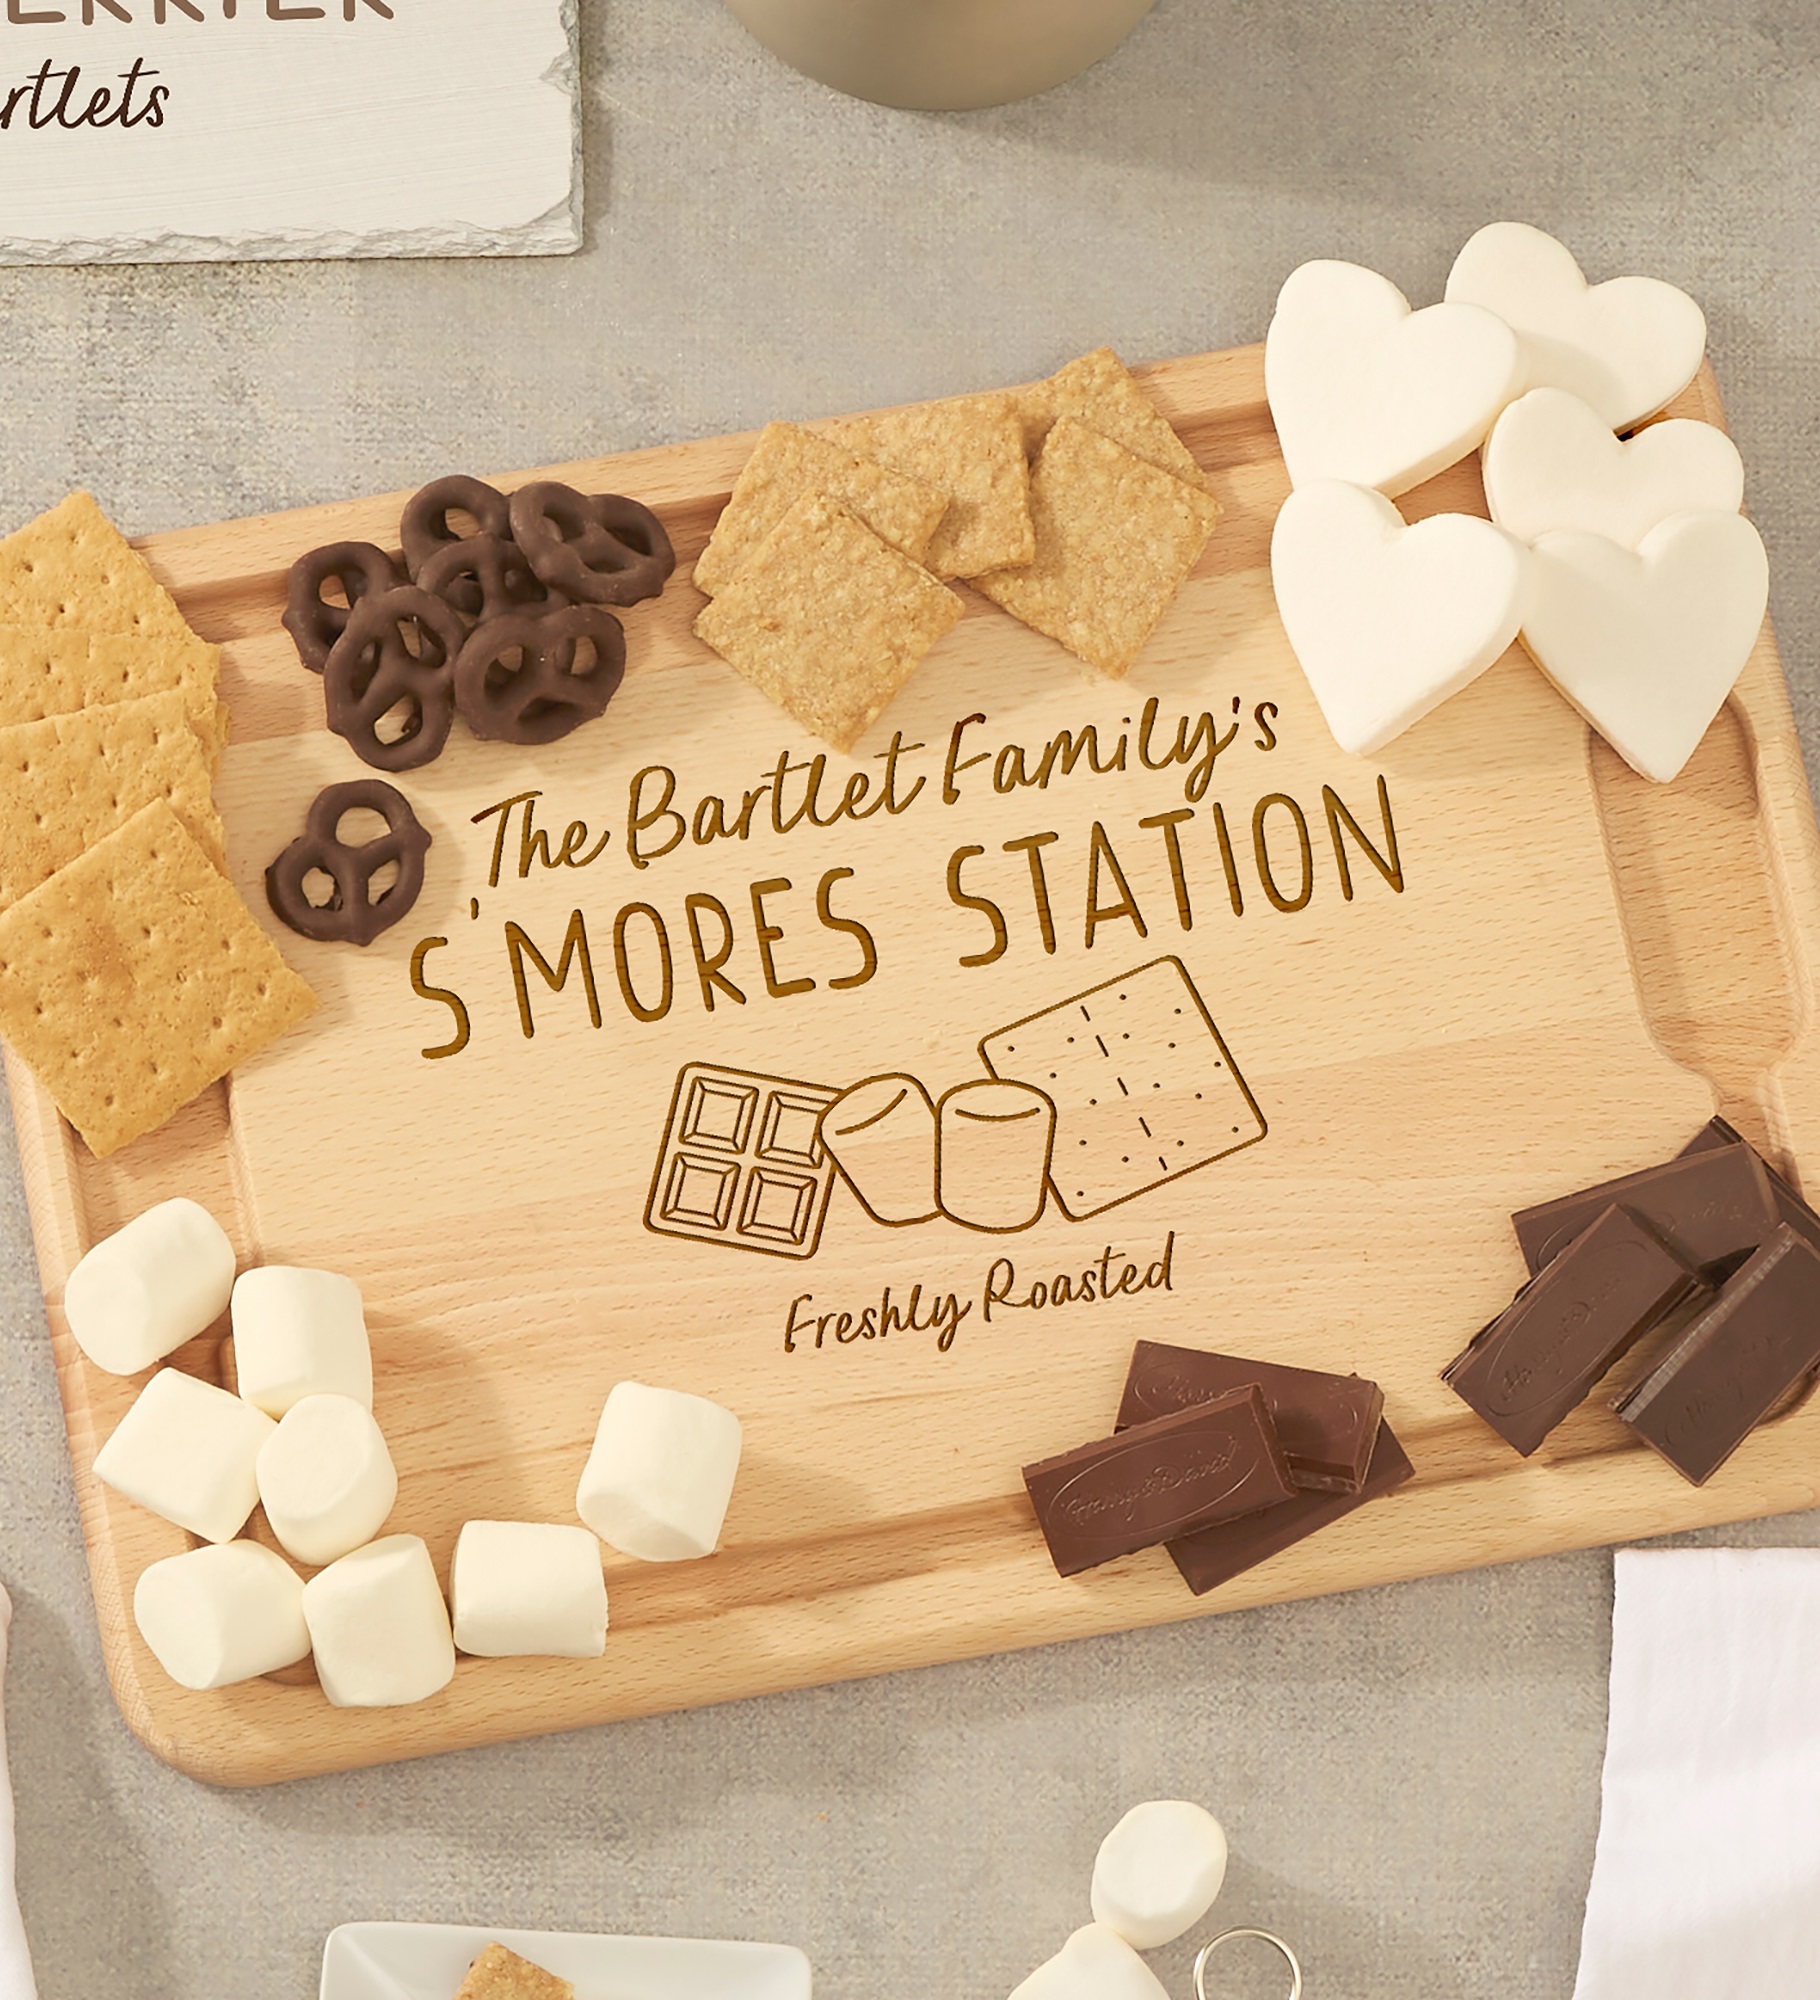 S'mores Station Personalized Hardwood Charcuterie Board